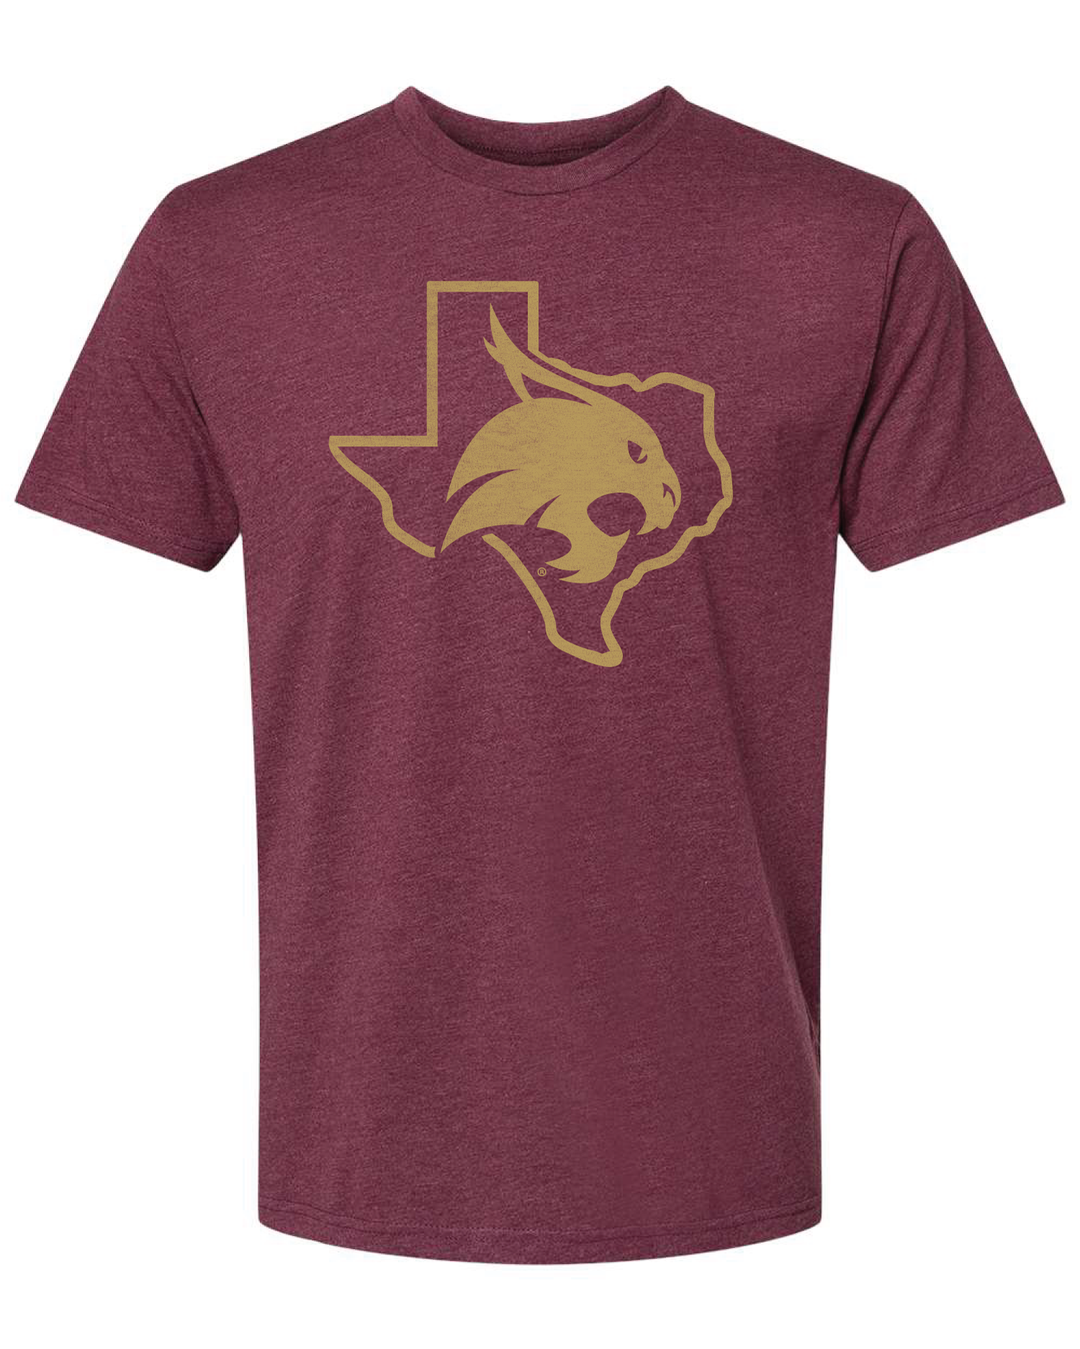 Maroon Texas State T Shirt with Gold Bobcat and Texas outline